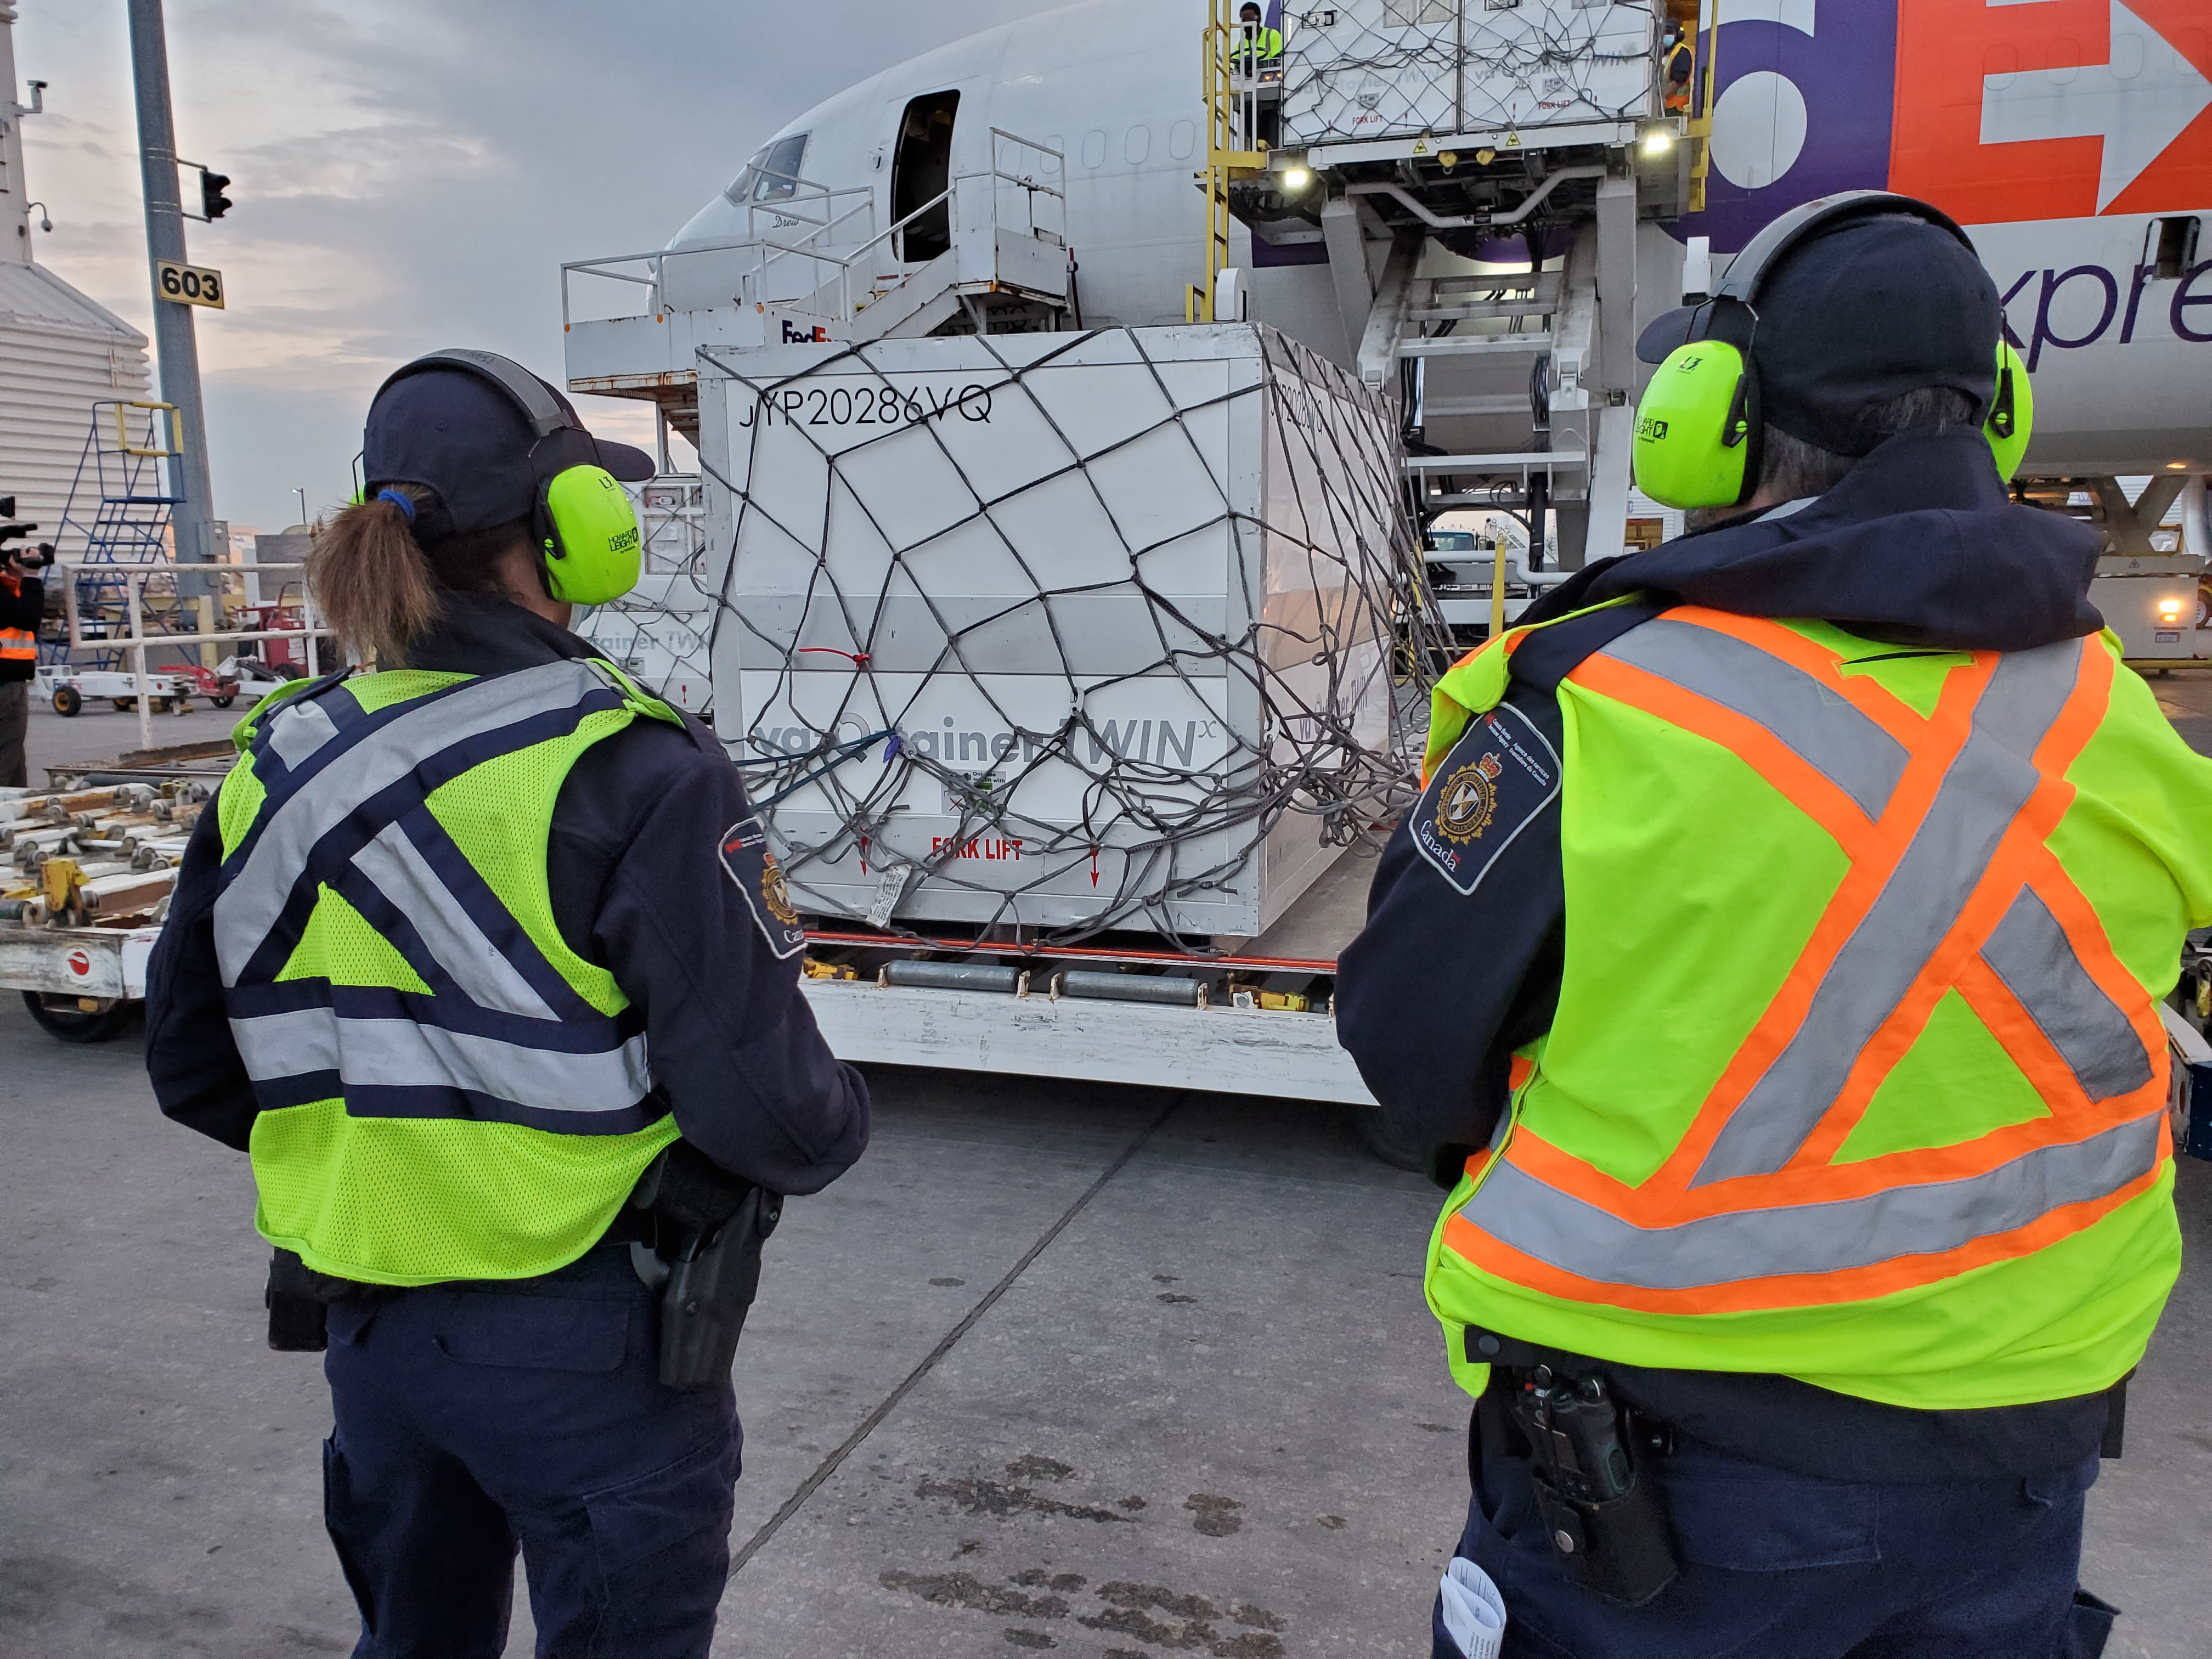 Employees in safety vests look on as a shipment of vaccines is lowered from a plane to the tarmac